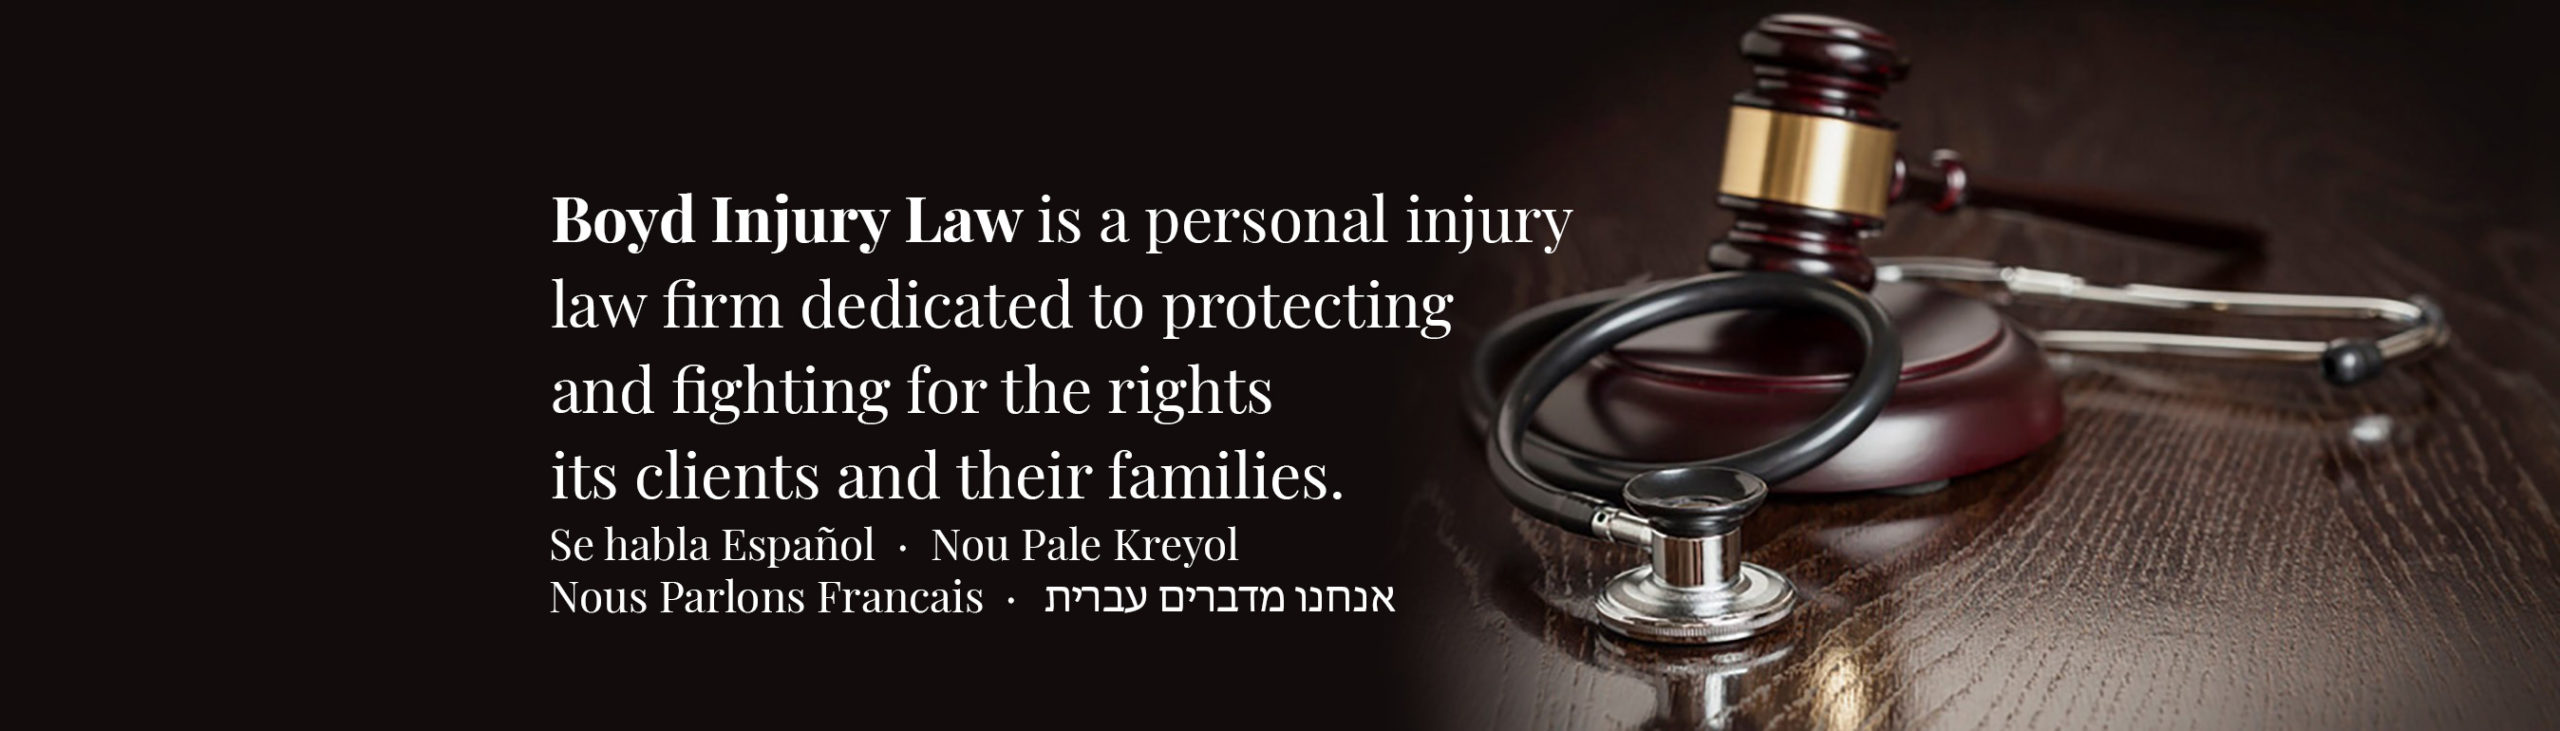 Personal & Accident Injury Law Firm